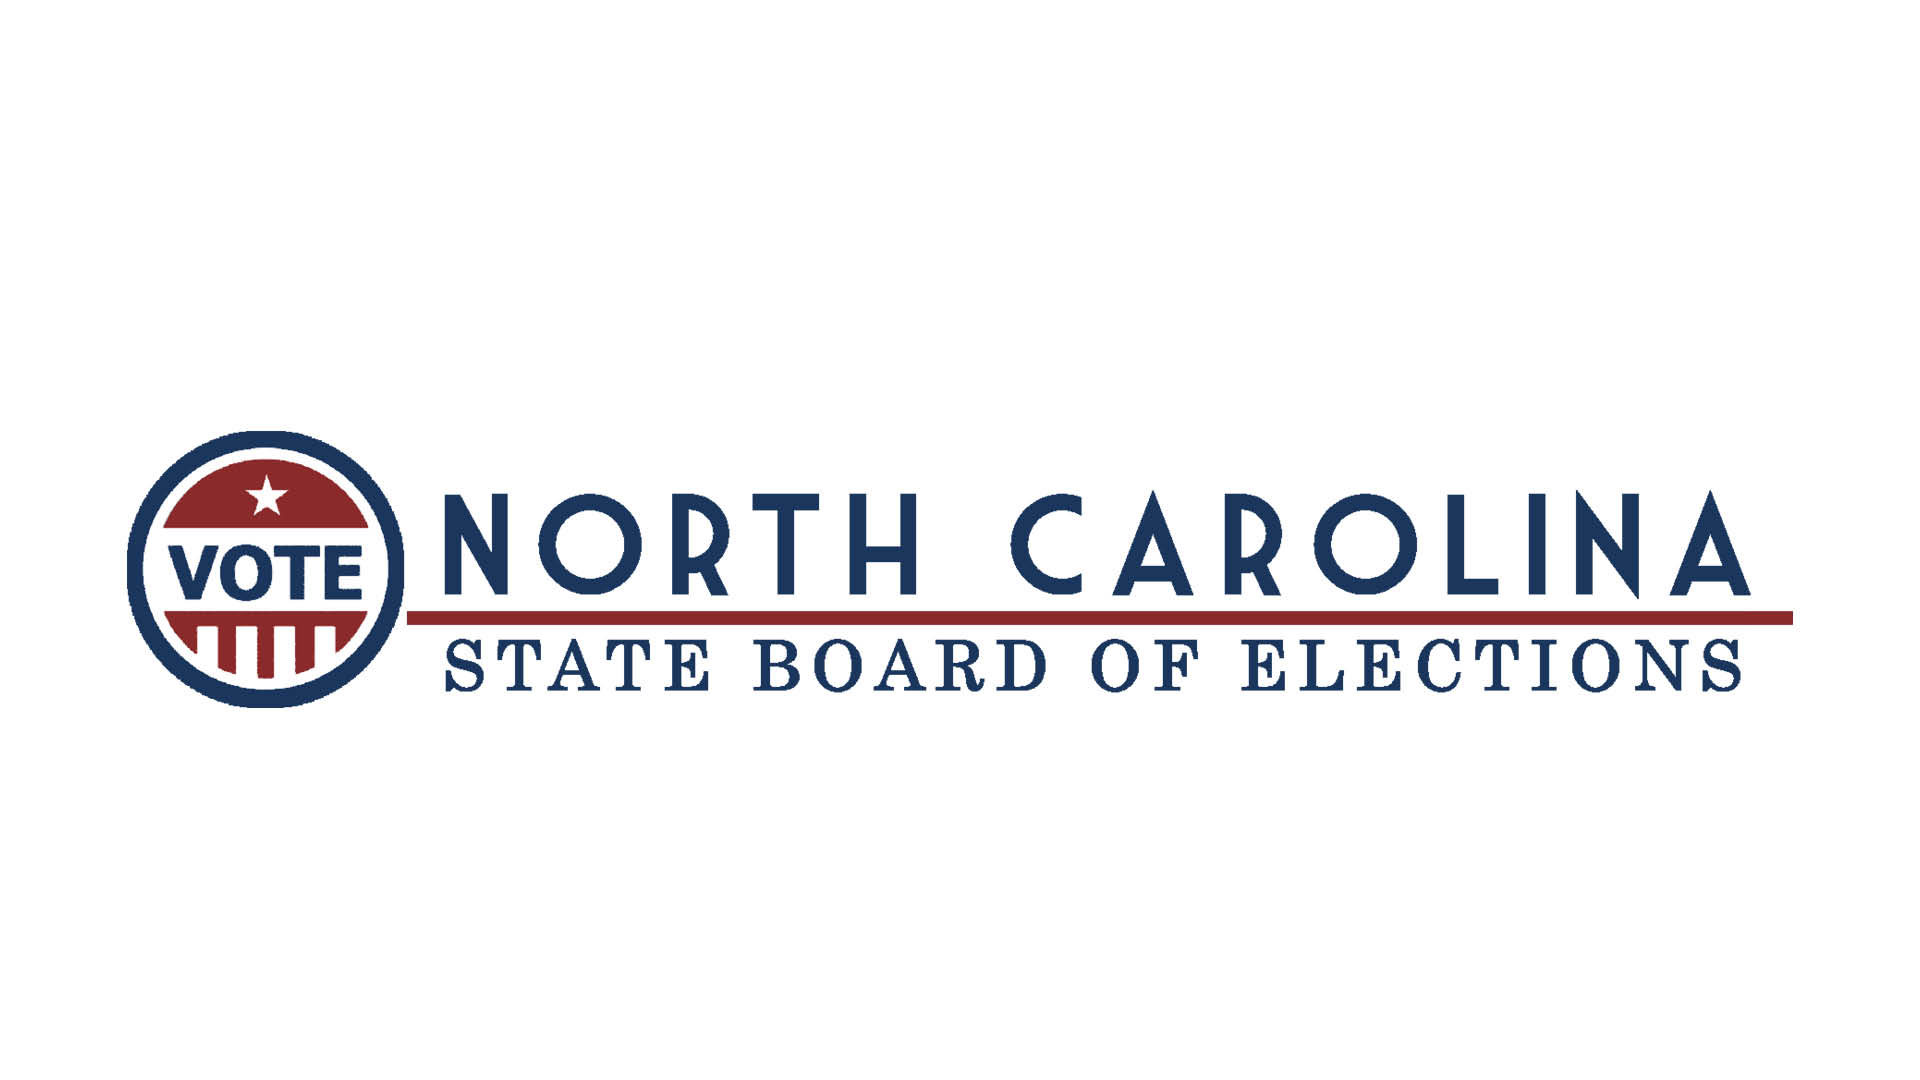 NC State Board of Elections